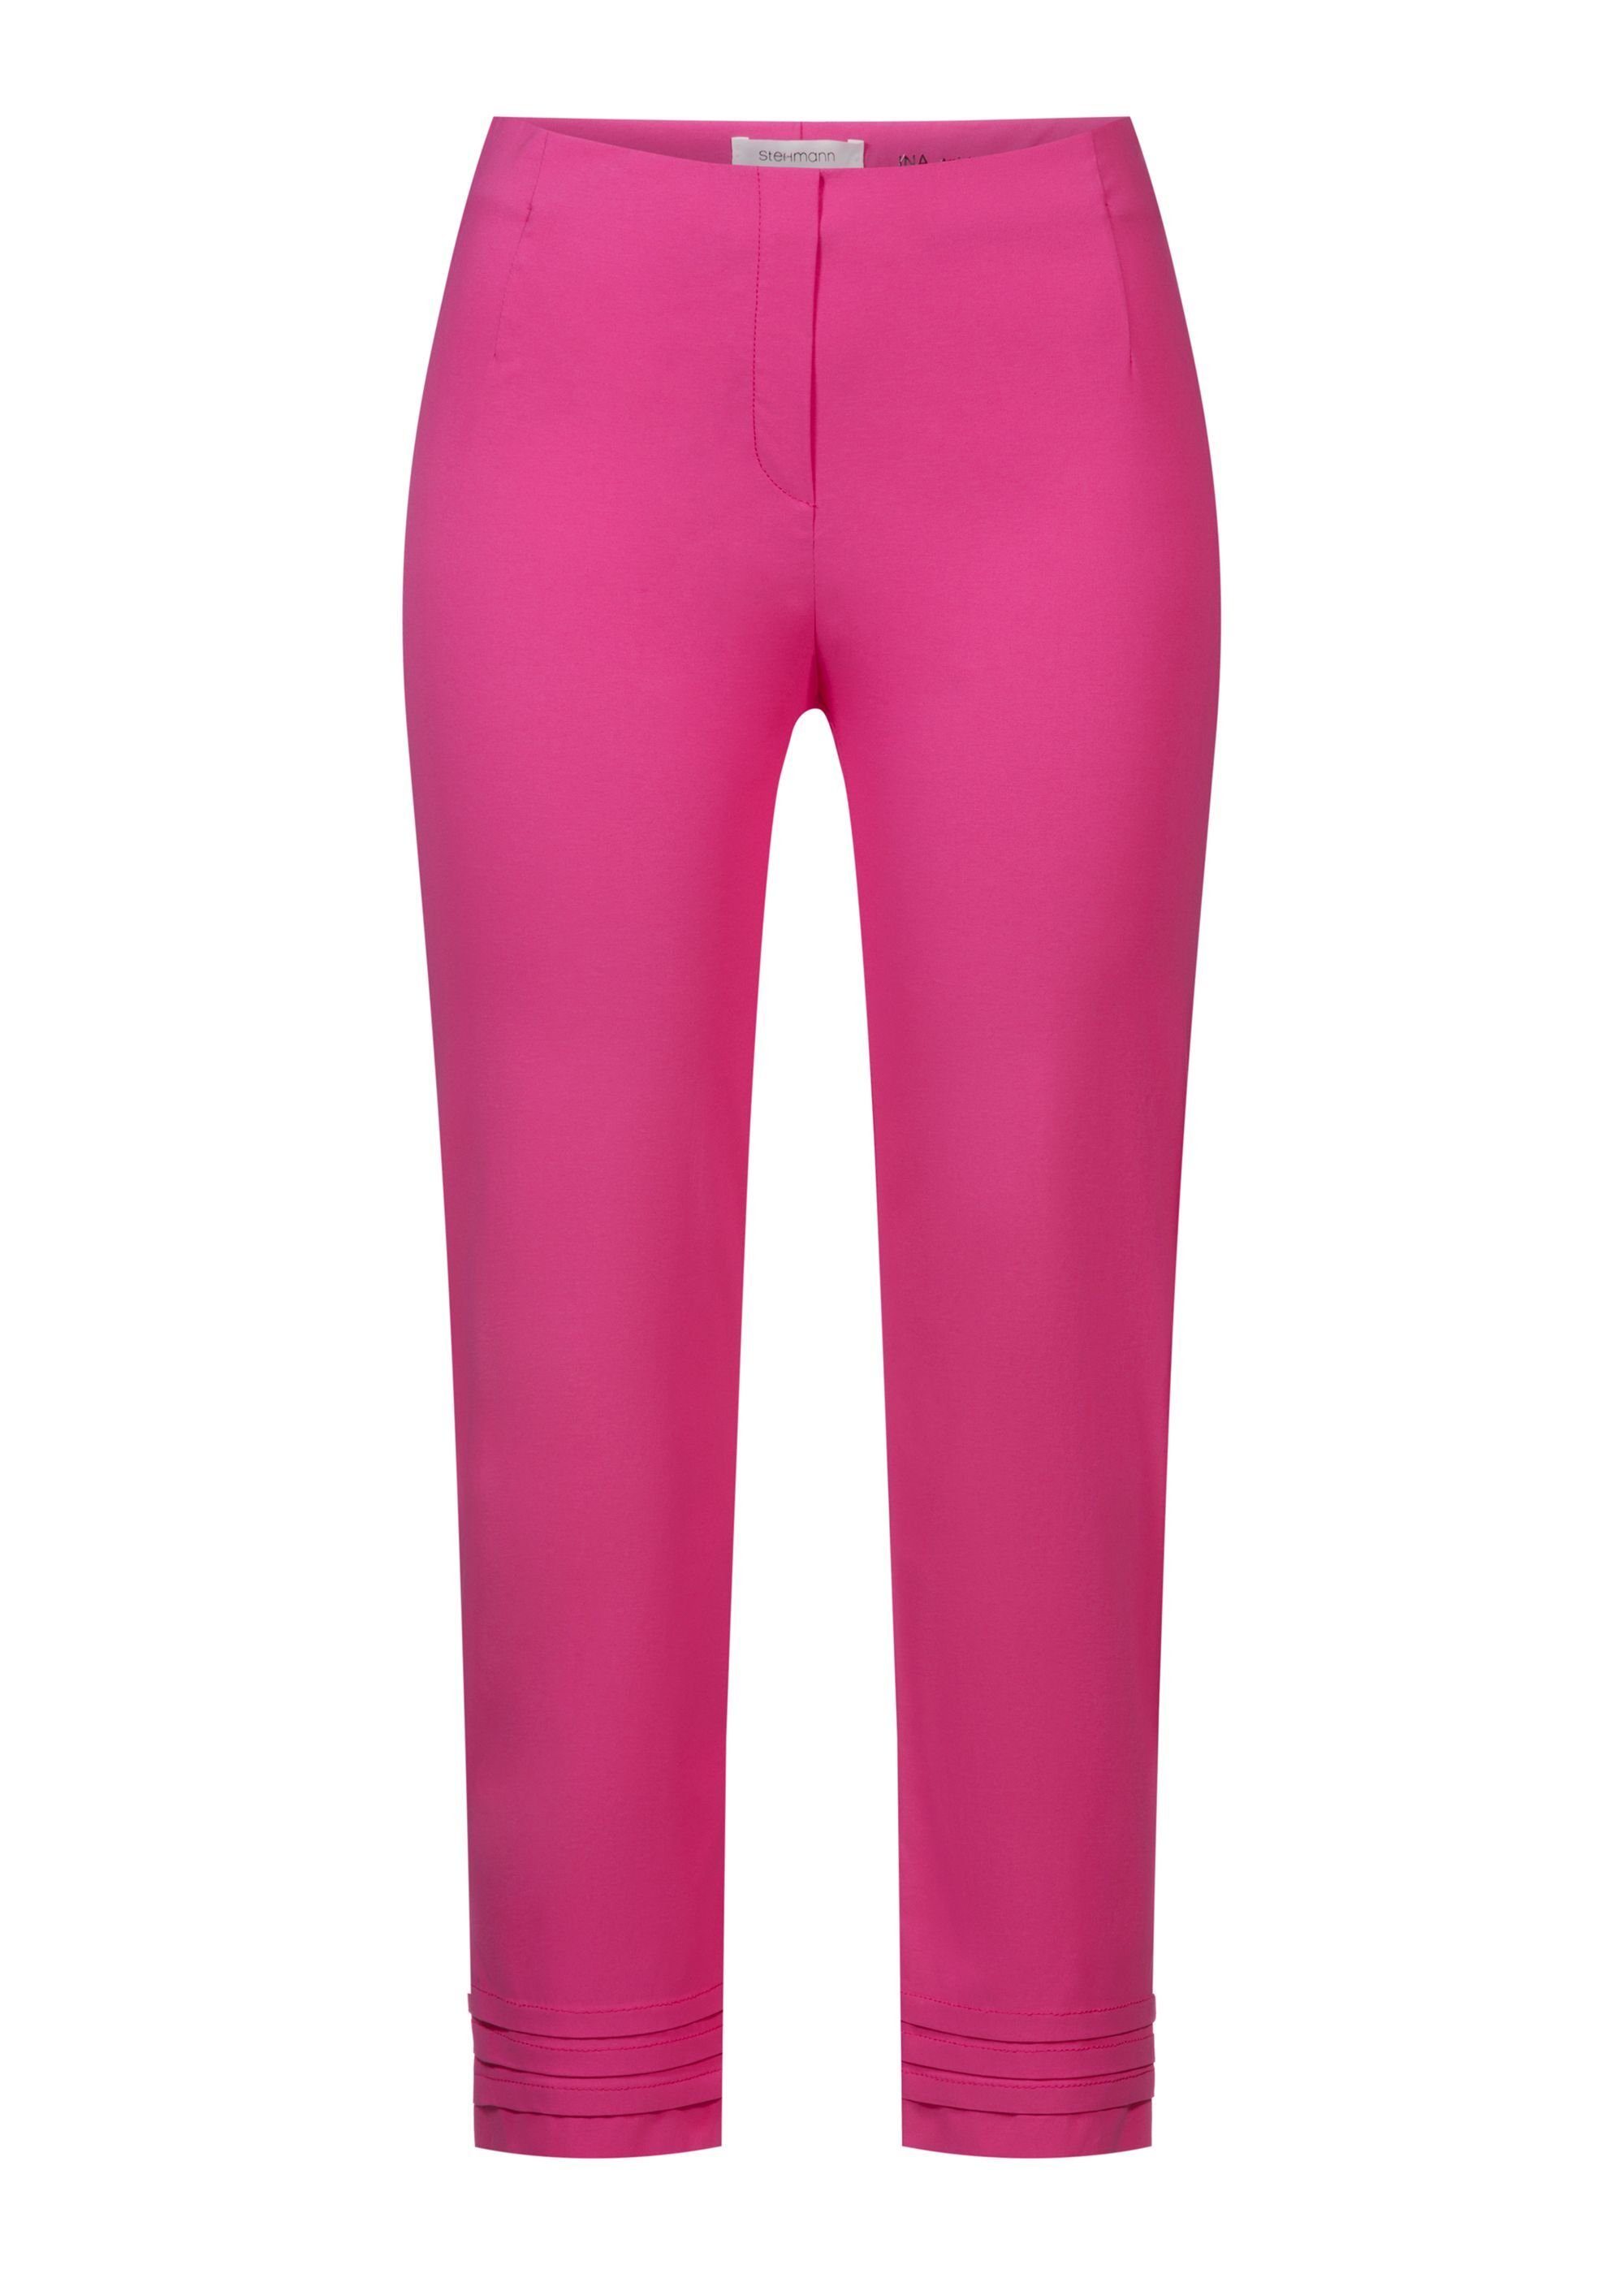 fuxia Faltendetails Stoffhose Stehmann mit Ina fluo